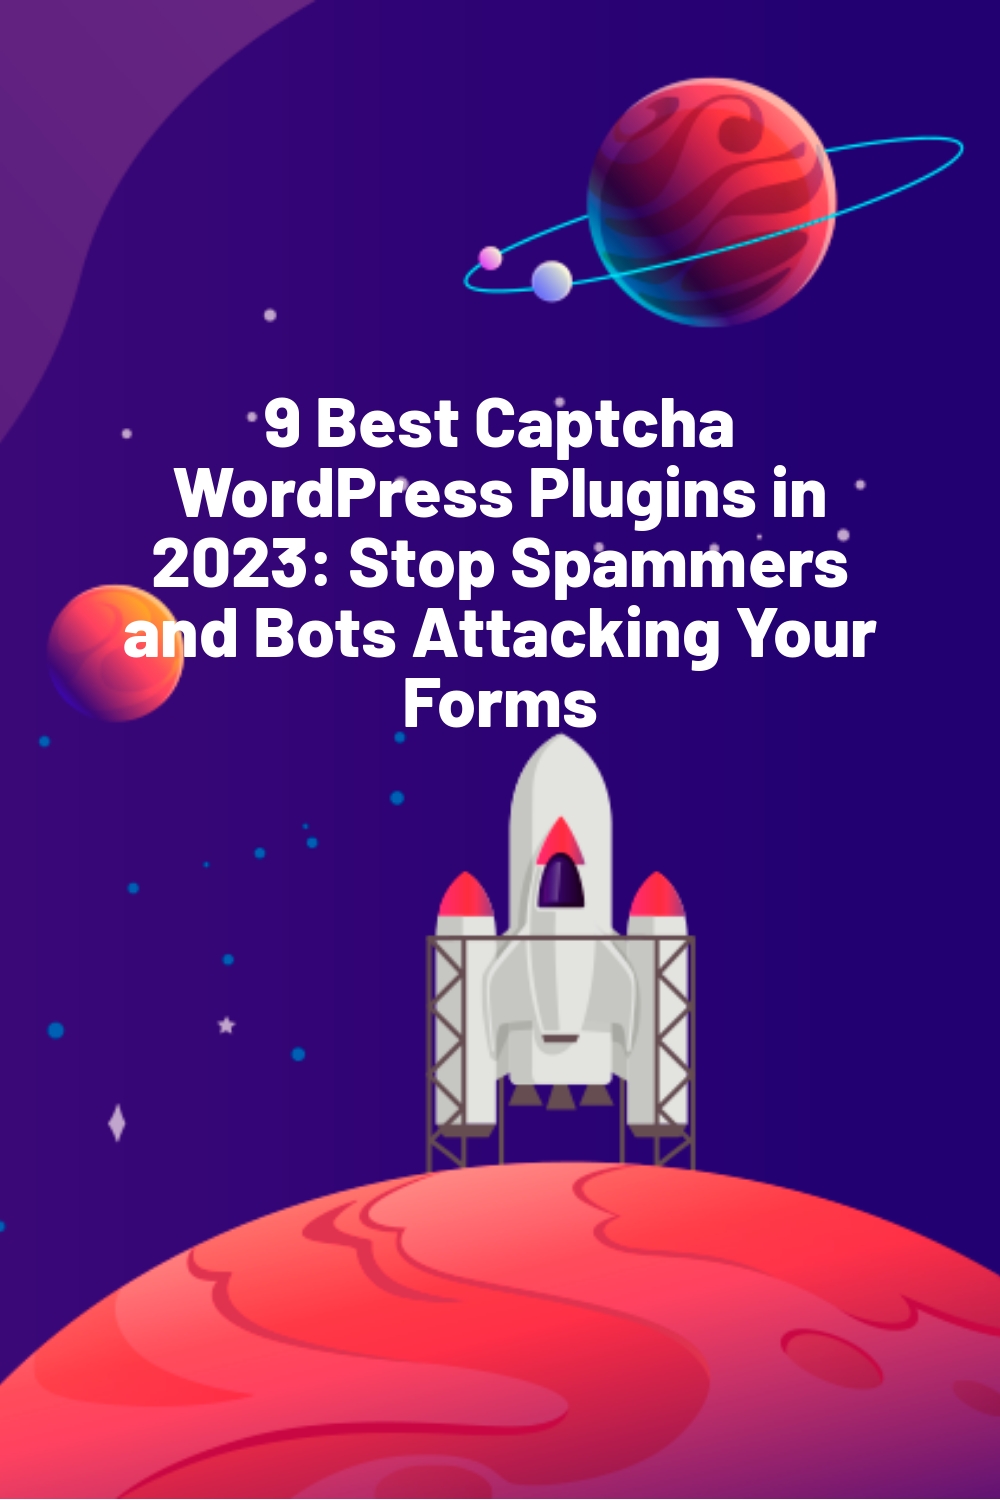 9 Best Captcha WordPress Plugins in 2023: Stop Spammers and Bots Attacking Your Forms